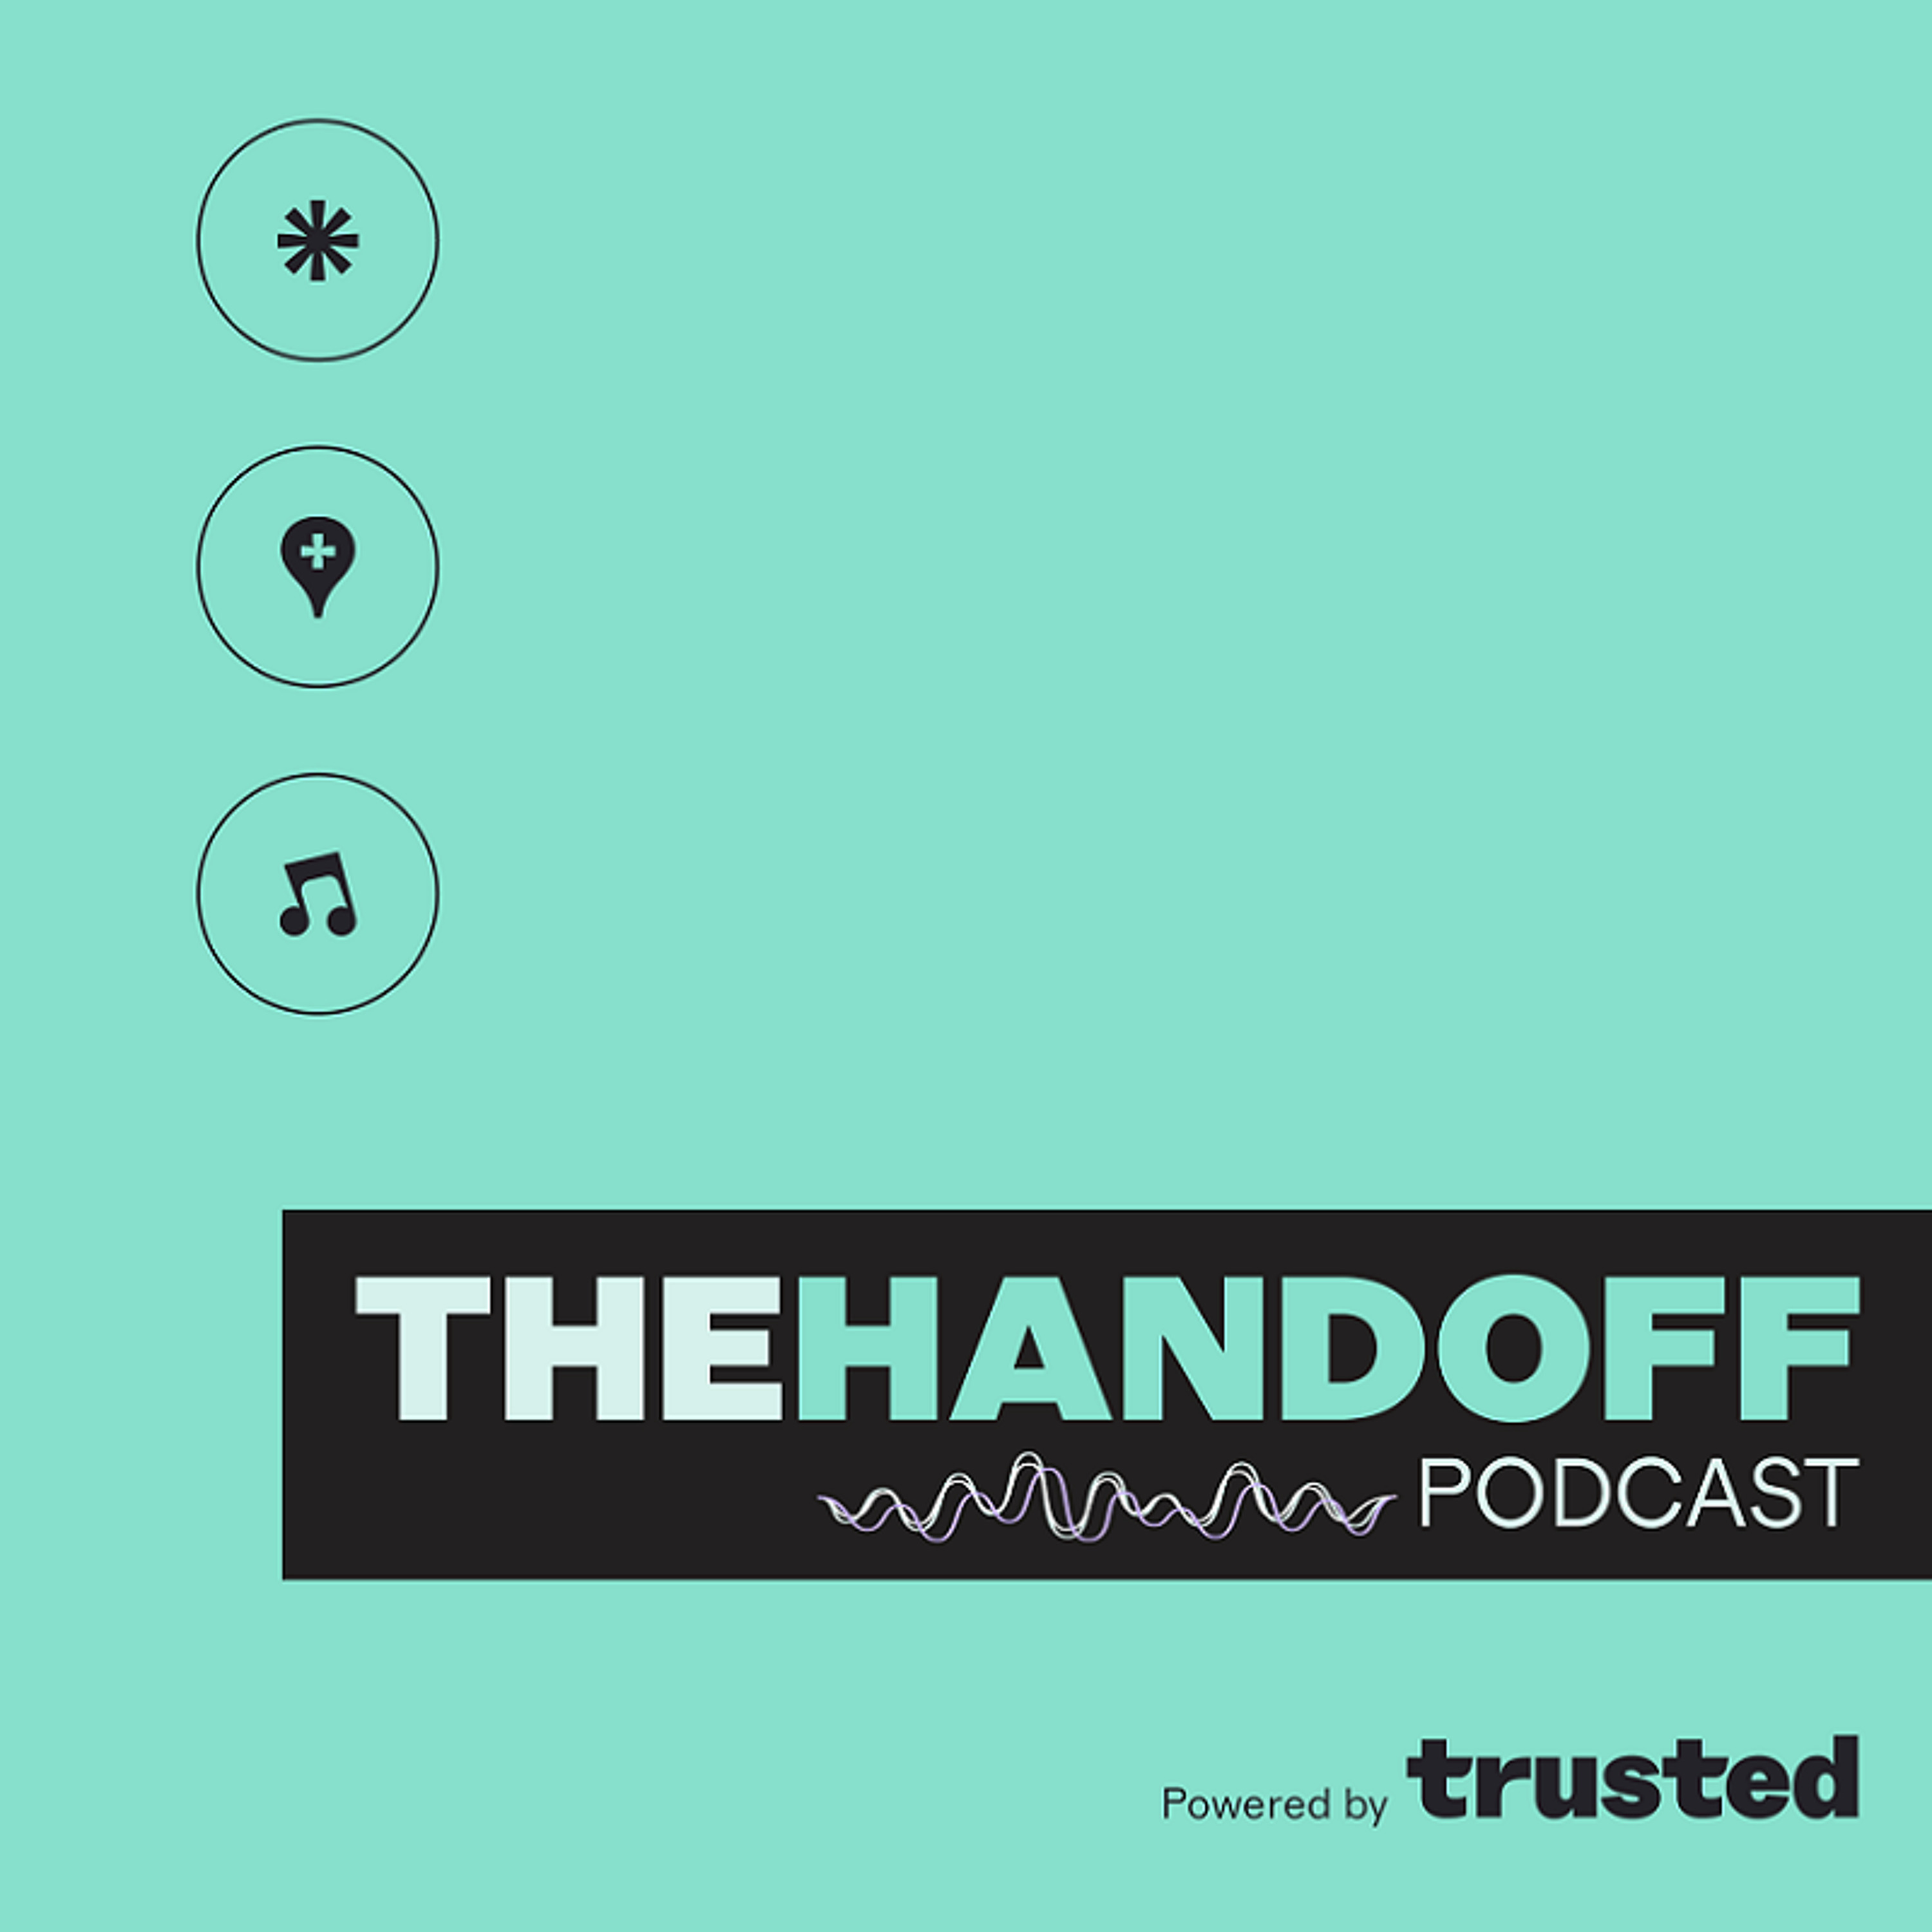 The Handoff: Creating a Strong Culture of Patient Safety